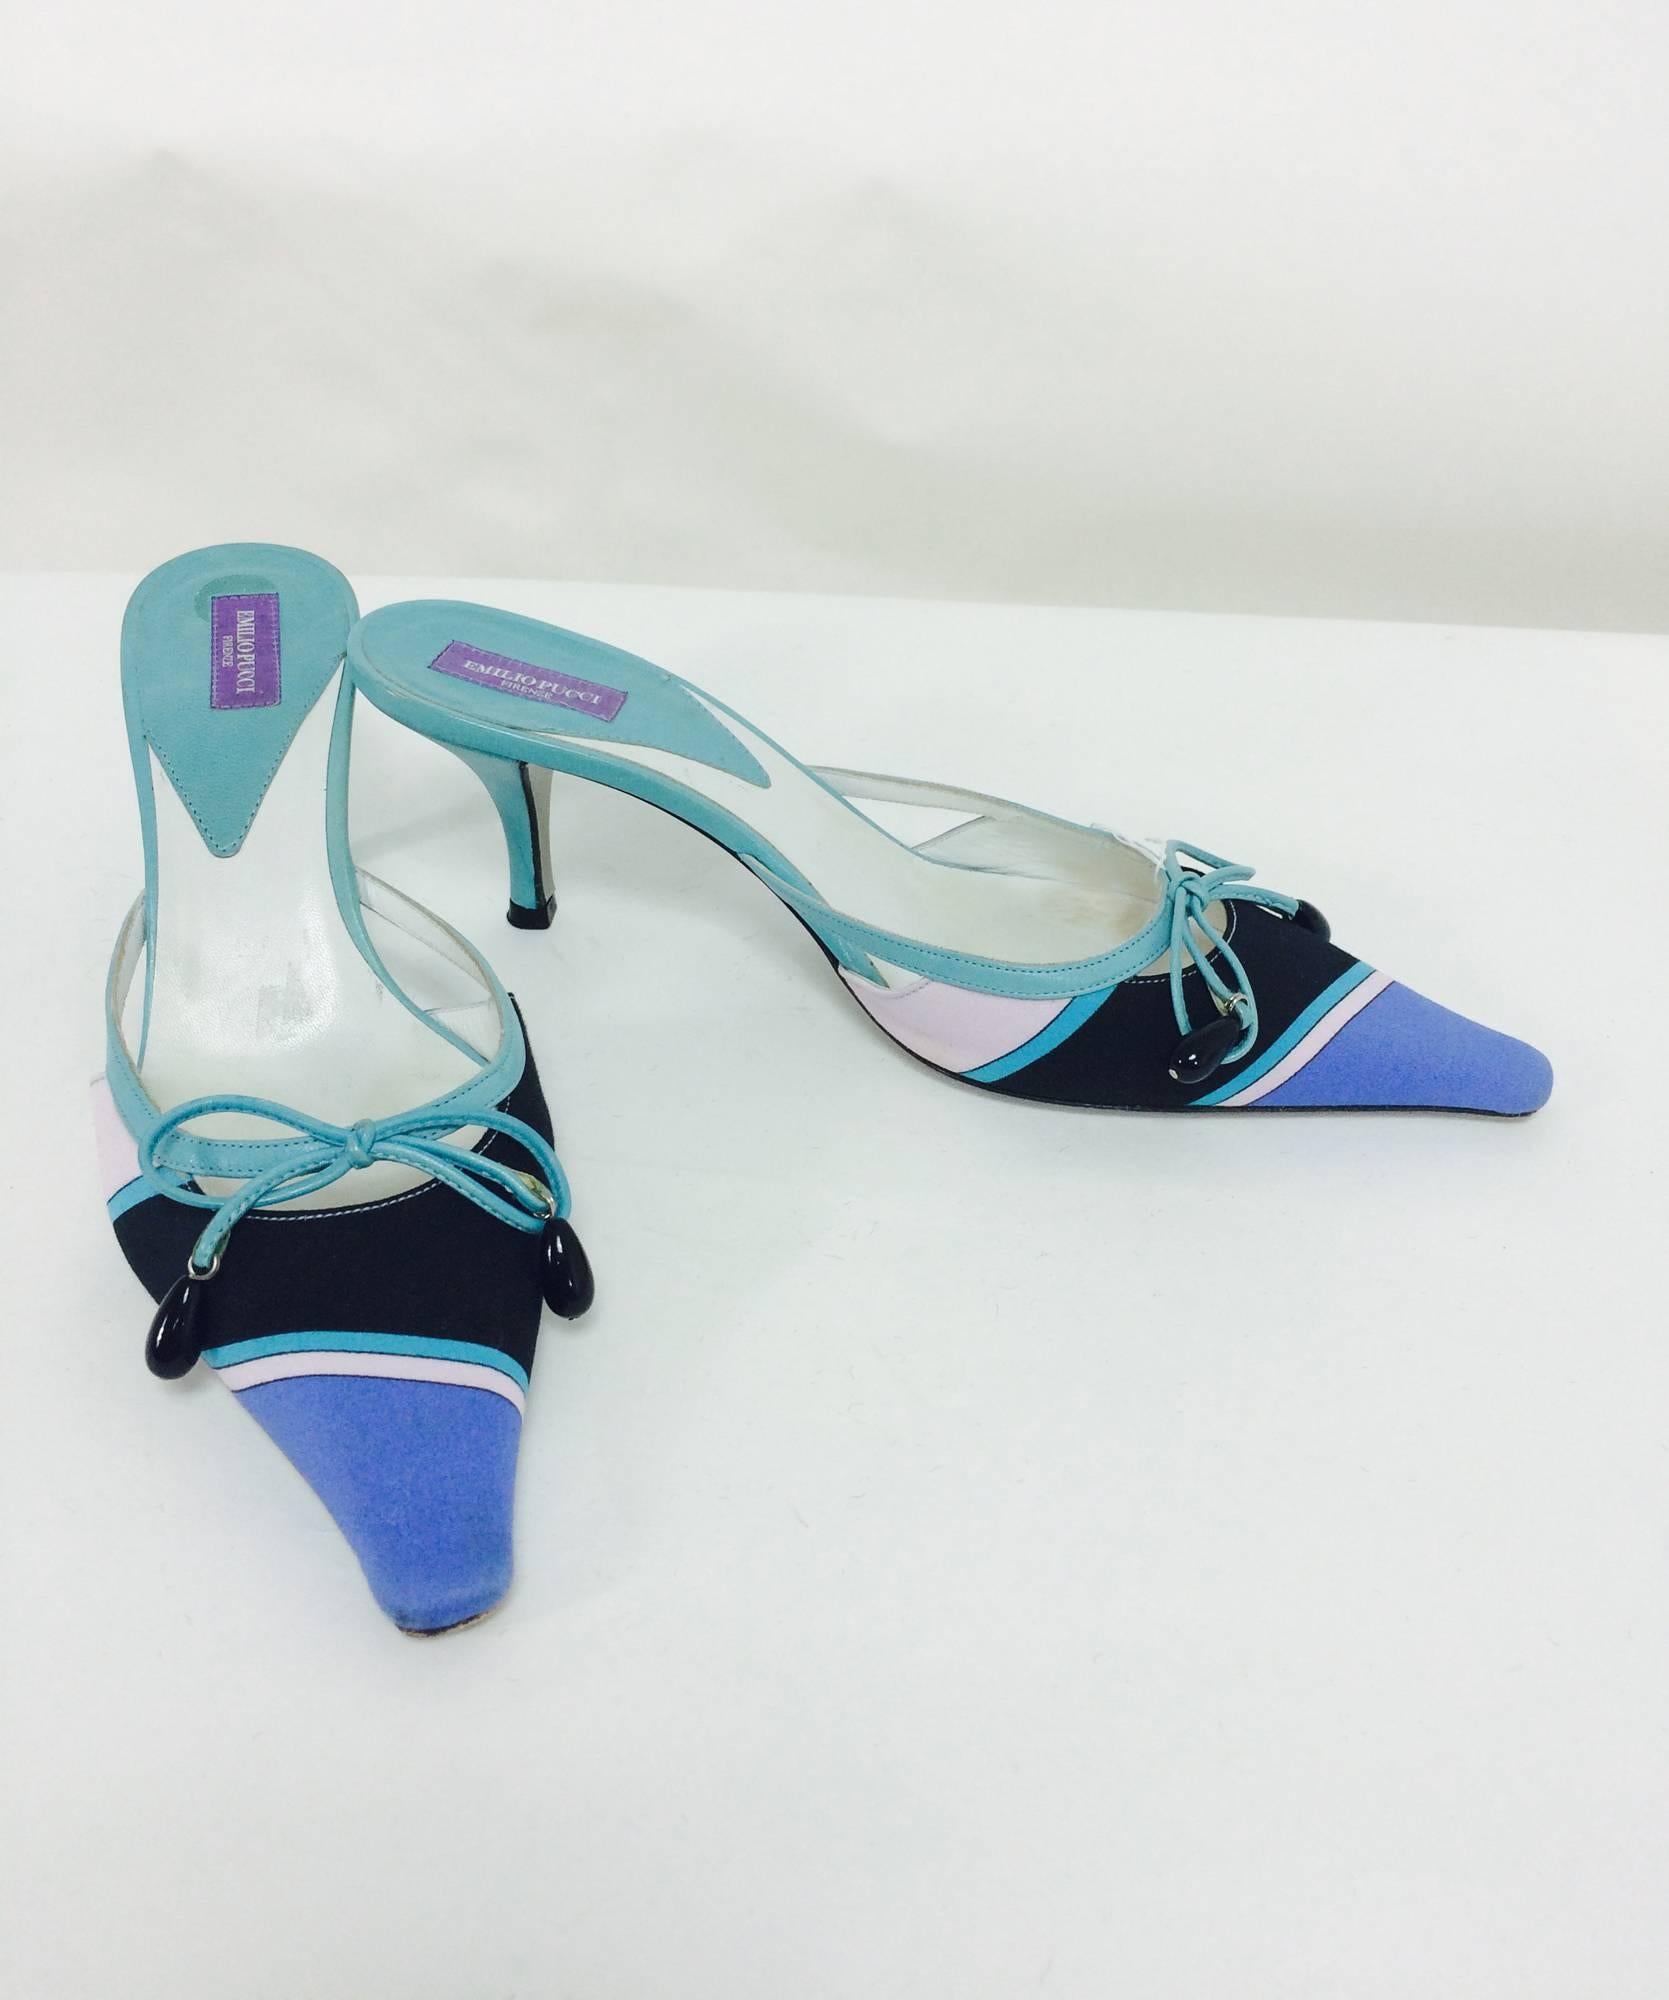 Pucci blue & aqua silk print bow & bead front high heel mules 36 1/2 ...Turquoise leather trims and heels, bow tie with black bead trim...Marked size 36 1/2 width is on the narrow side of medium...In nice pre owned condition with little wear.